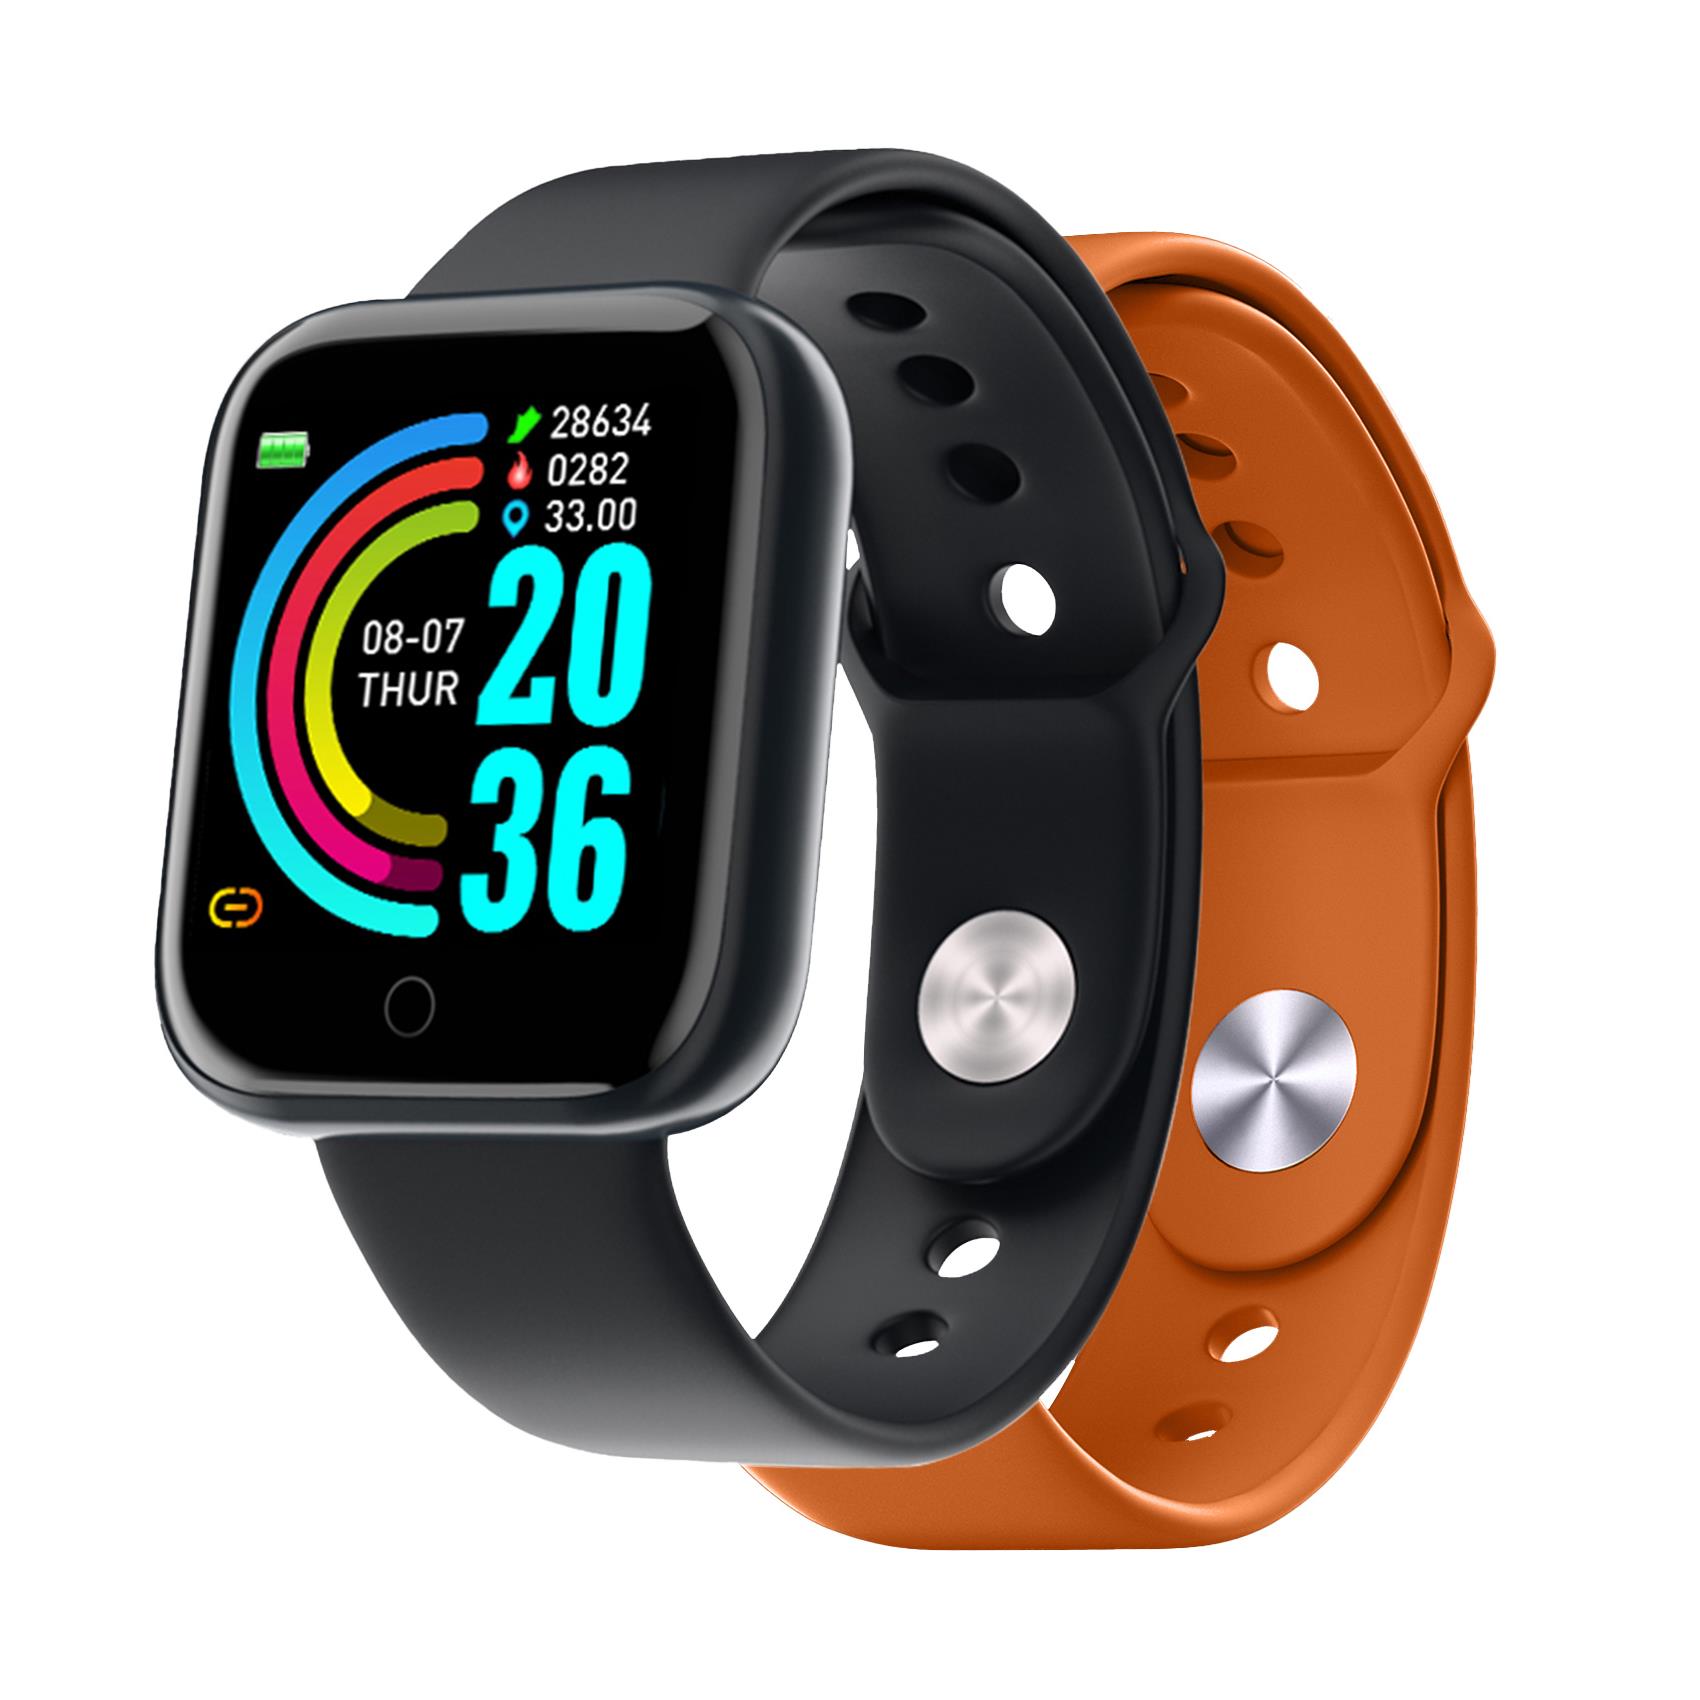 TRAINER SMARTBAND OR